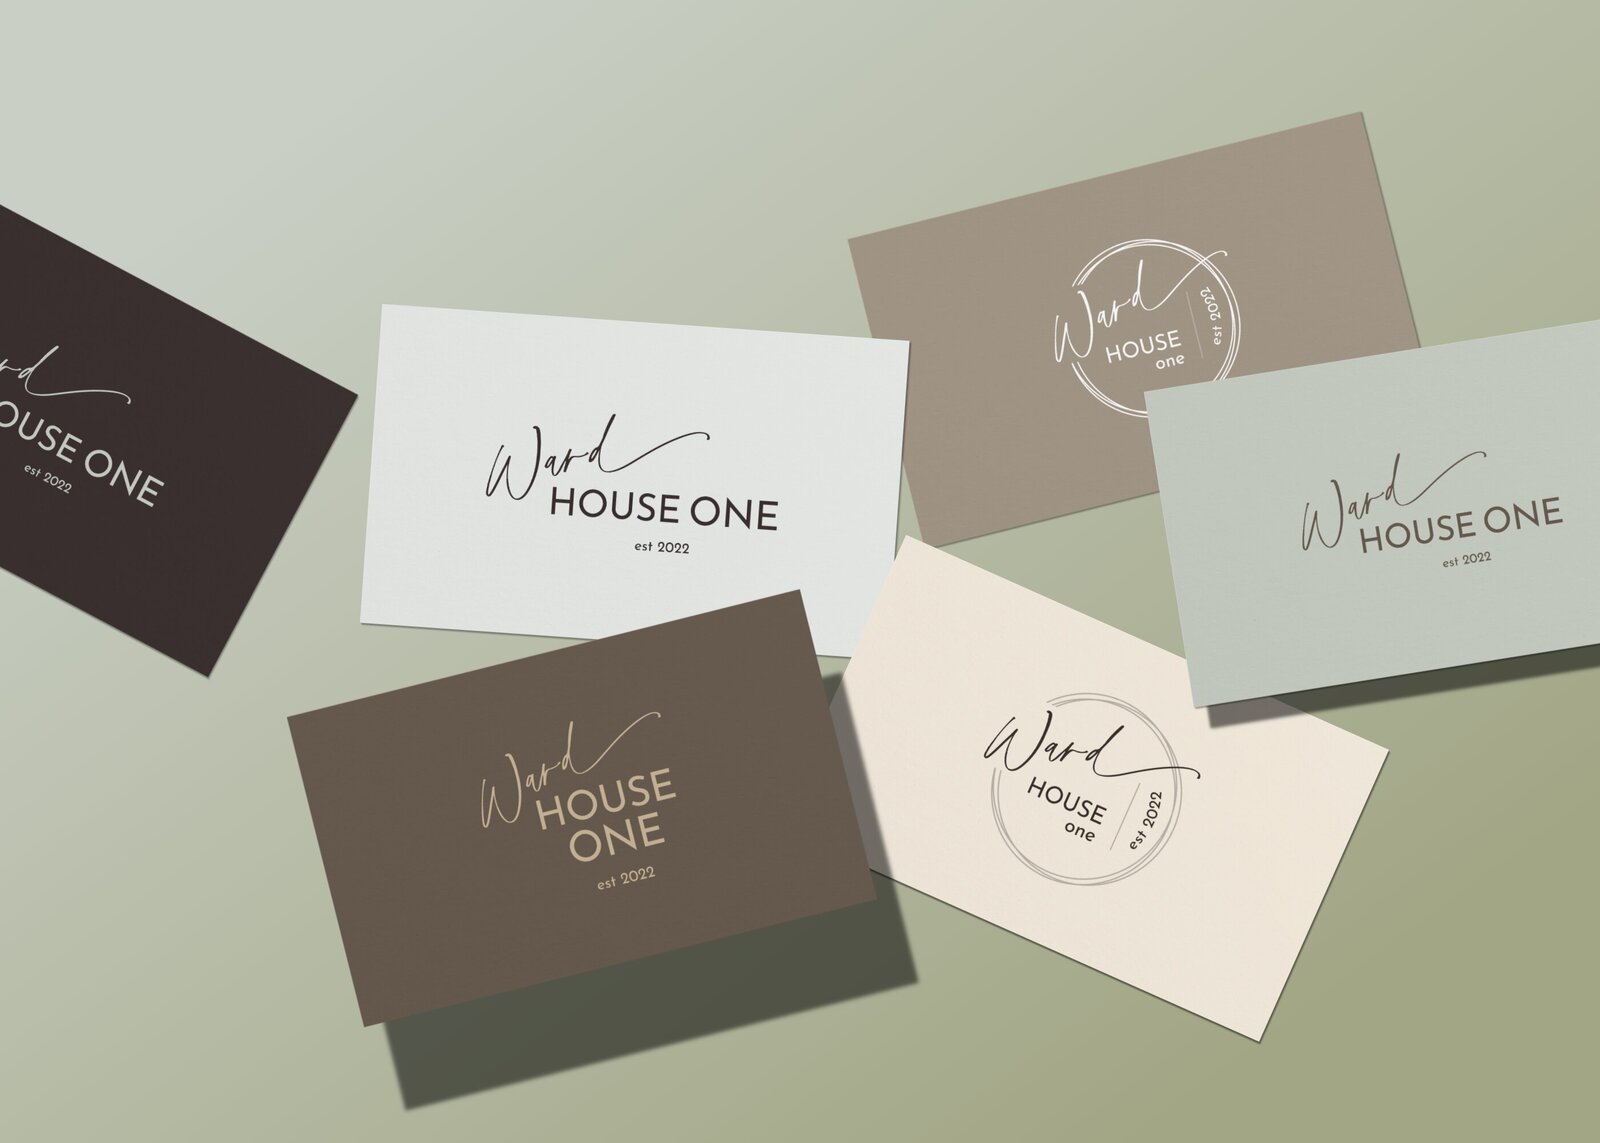 Ward House One business cards